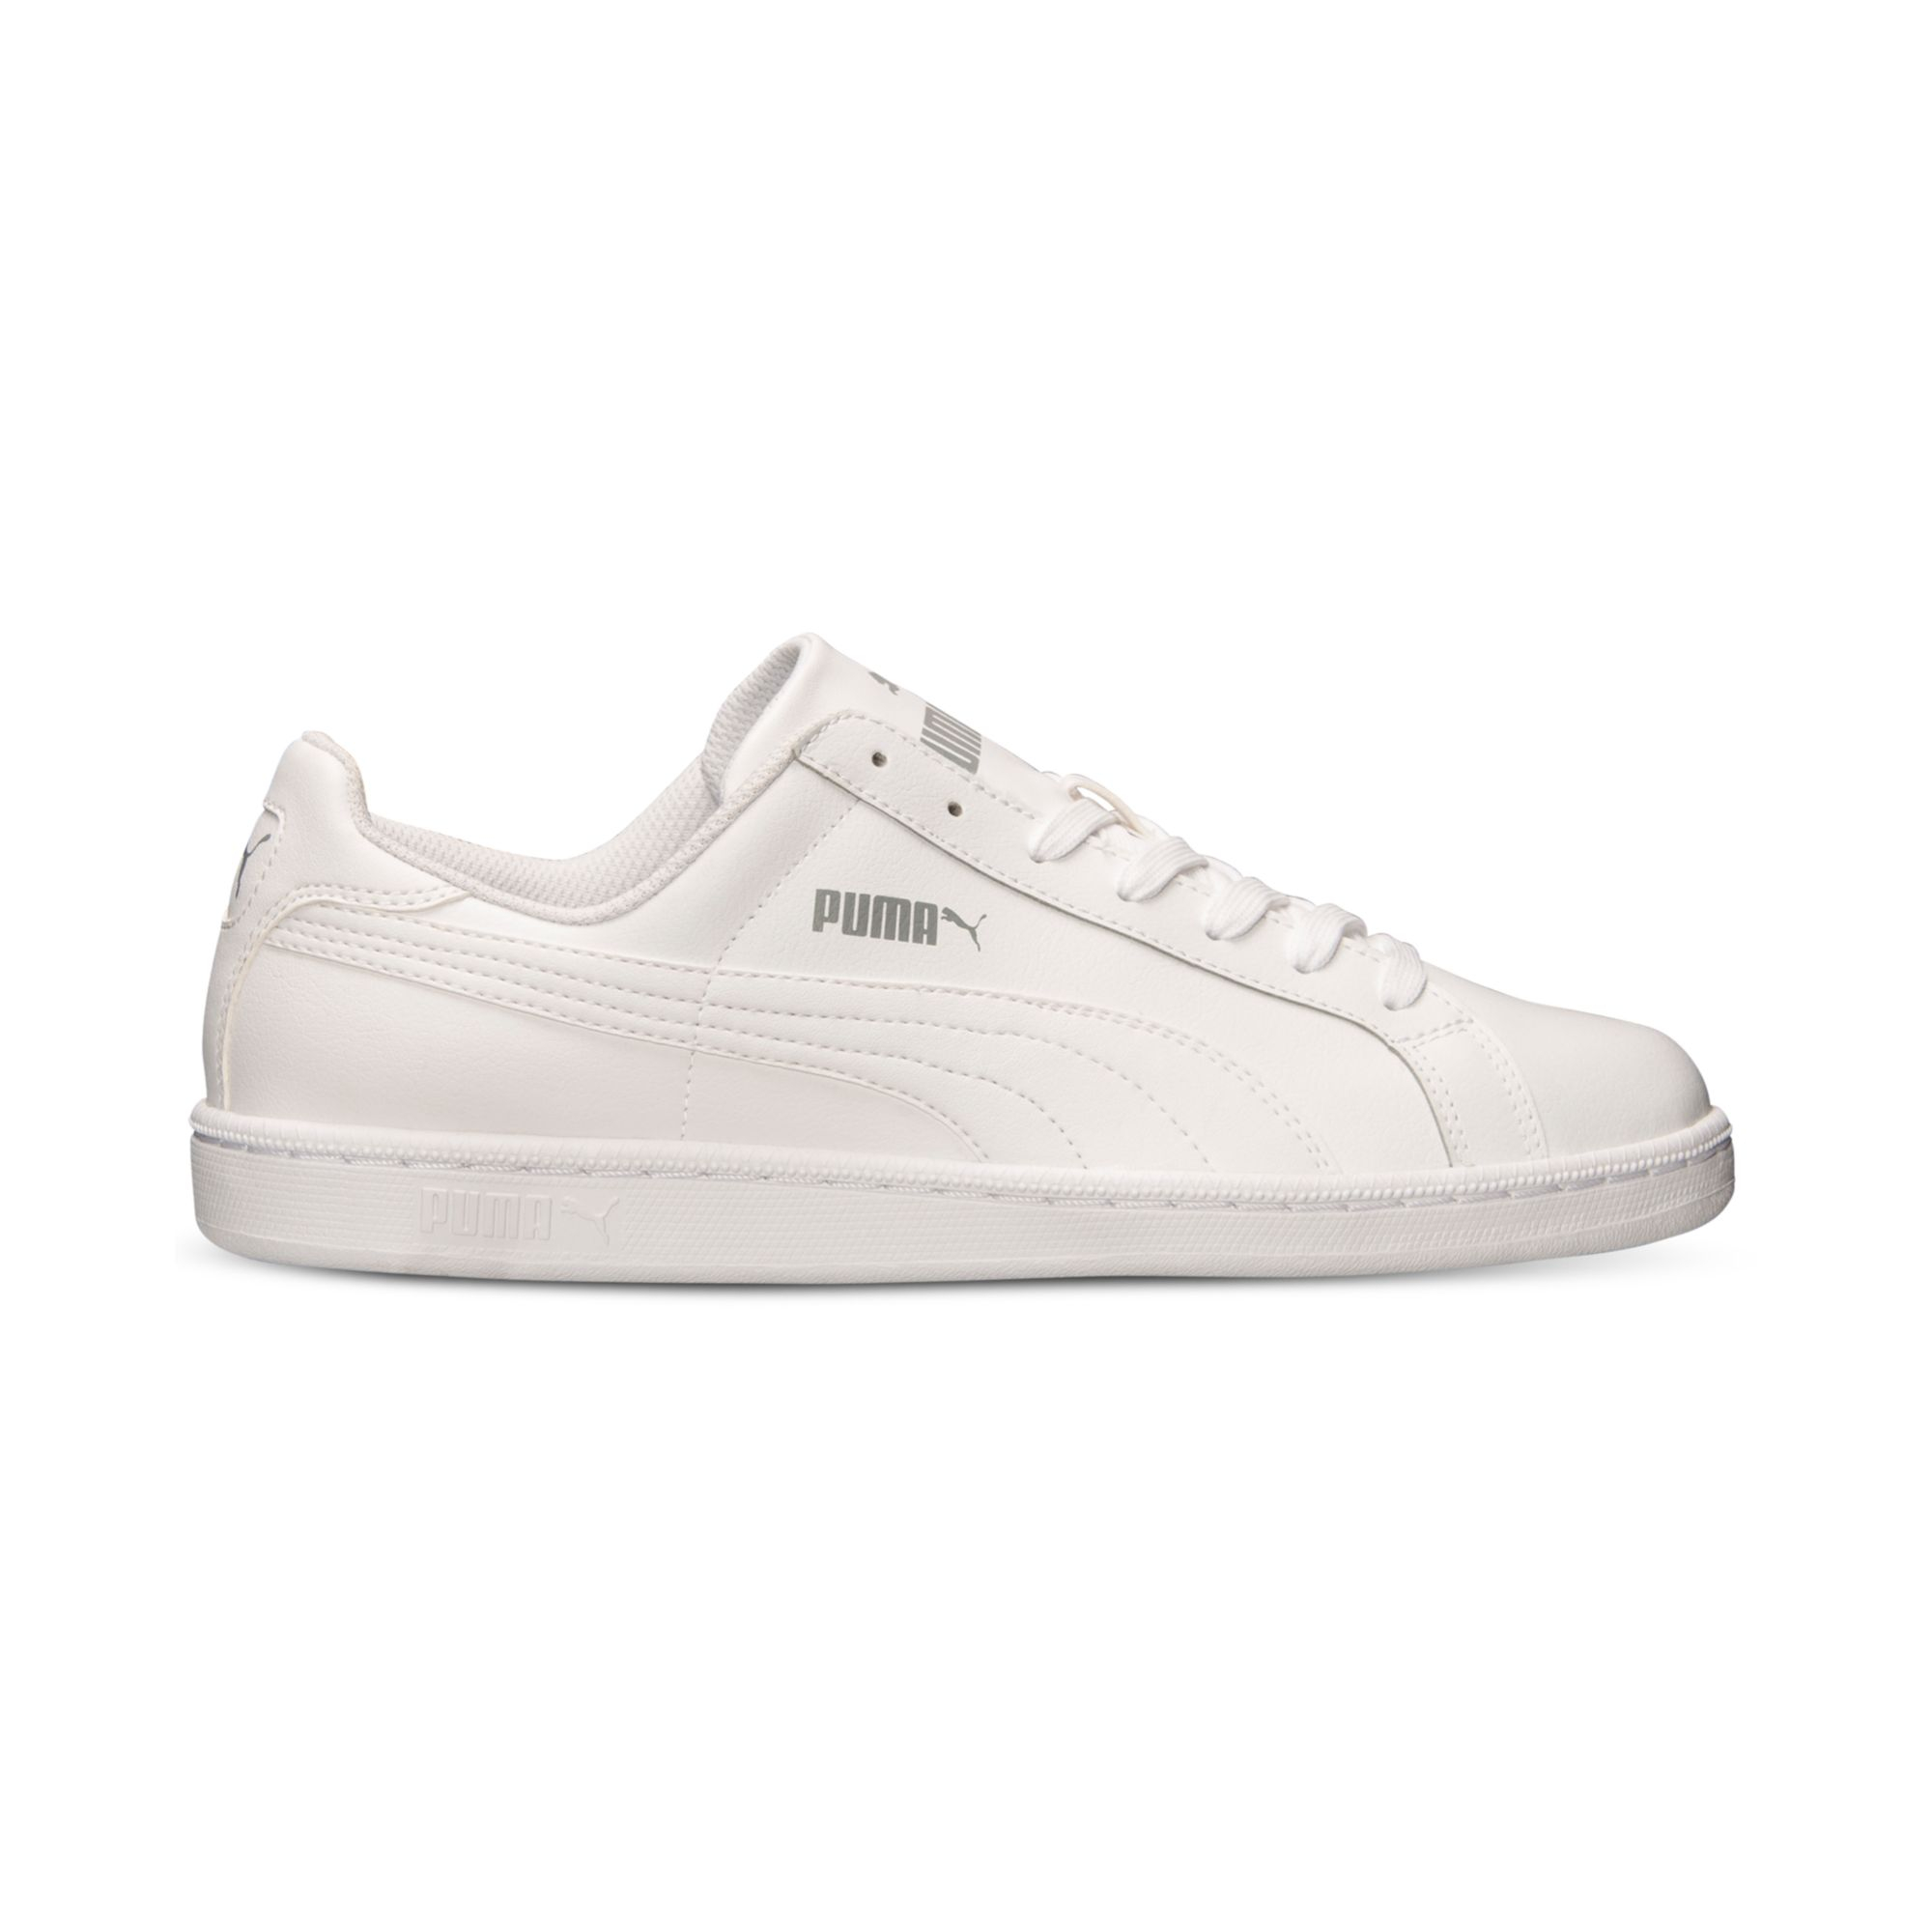 Puma Men'S Smash Leather Casual Sneakers From Finish Line in White for ...